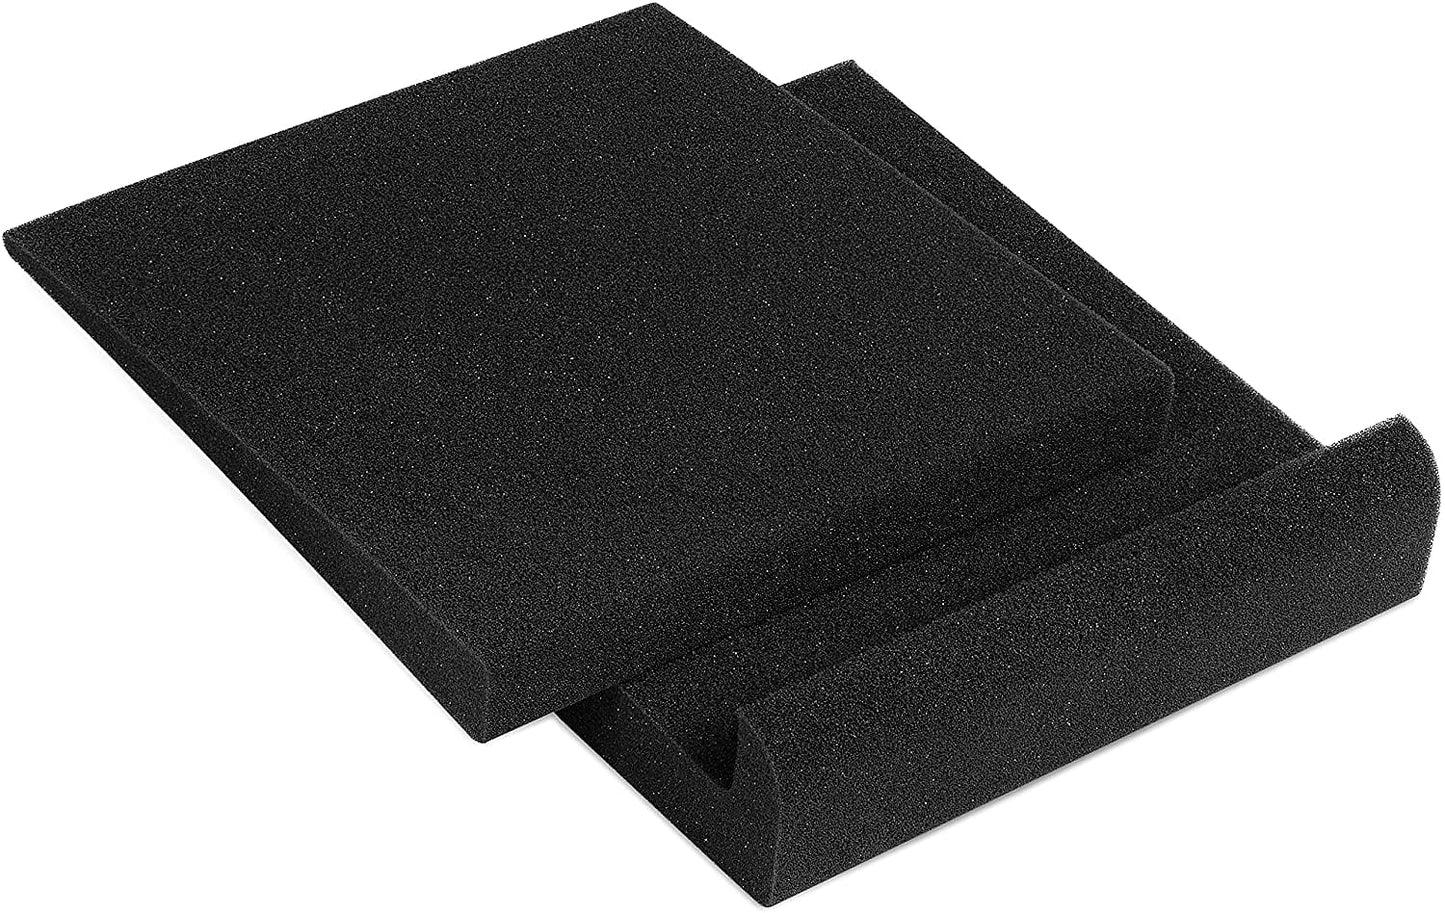 Pair of 2 High Density Dampening Acoustic Studio Monitor Isolation Pads